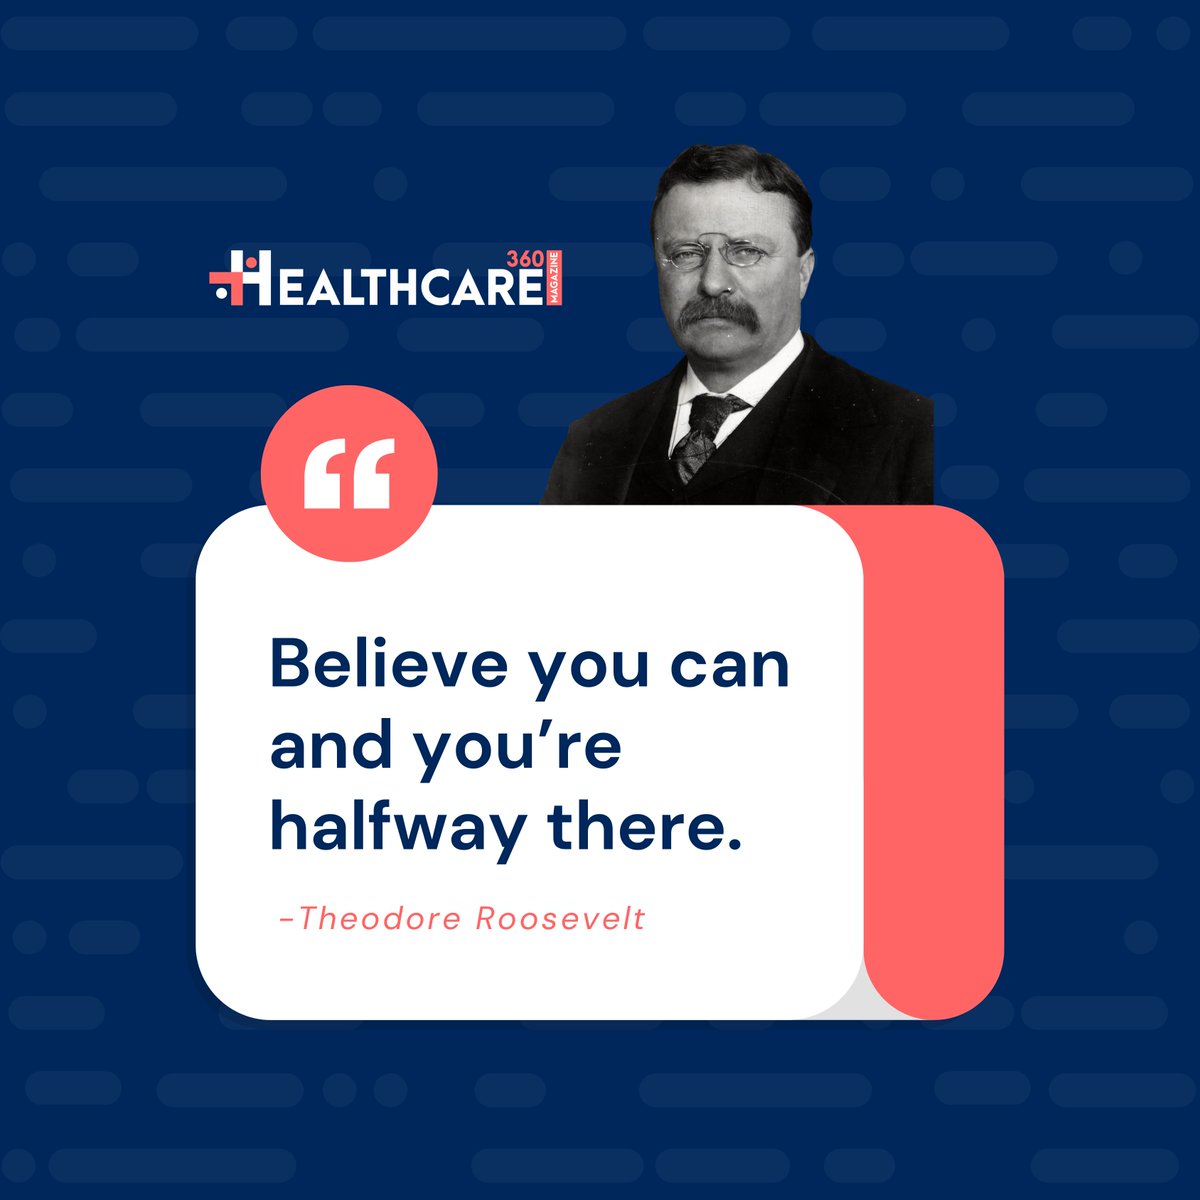 Theodore Roosevelt said it best: “Believe you can and you’re halfway there.” This applies perfectly to your health goals too.

#BelieveAndAchieve #InspirationFromRoosevelt #MotivationMonday #RooseveltWisdom #HalfwayThere #EmpowermentQuotes #PositiveMindset #SuccessMindset